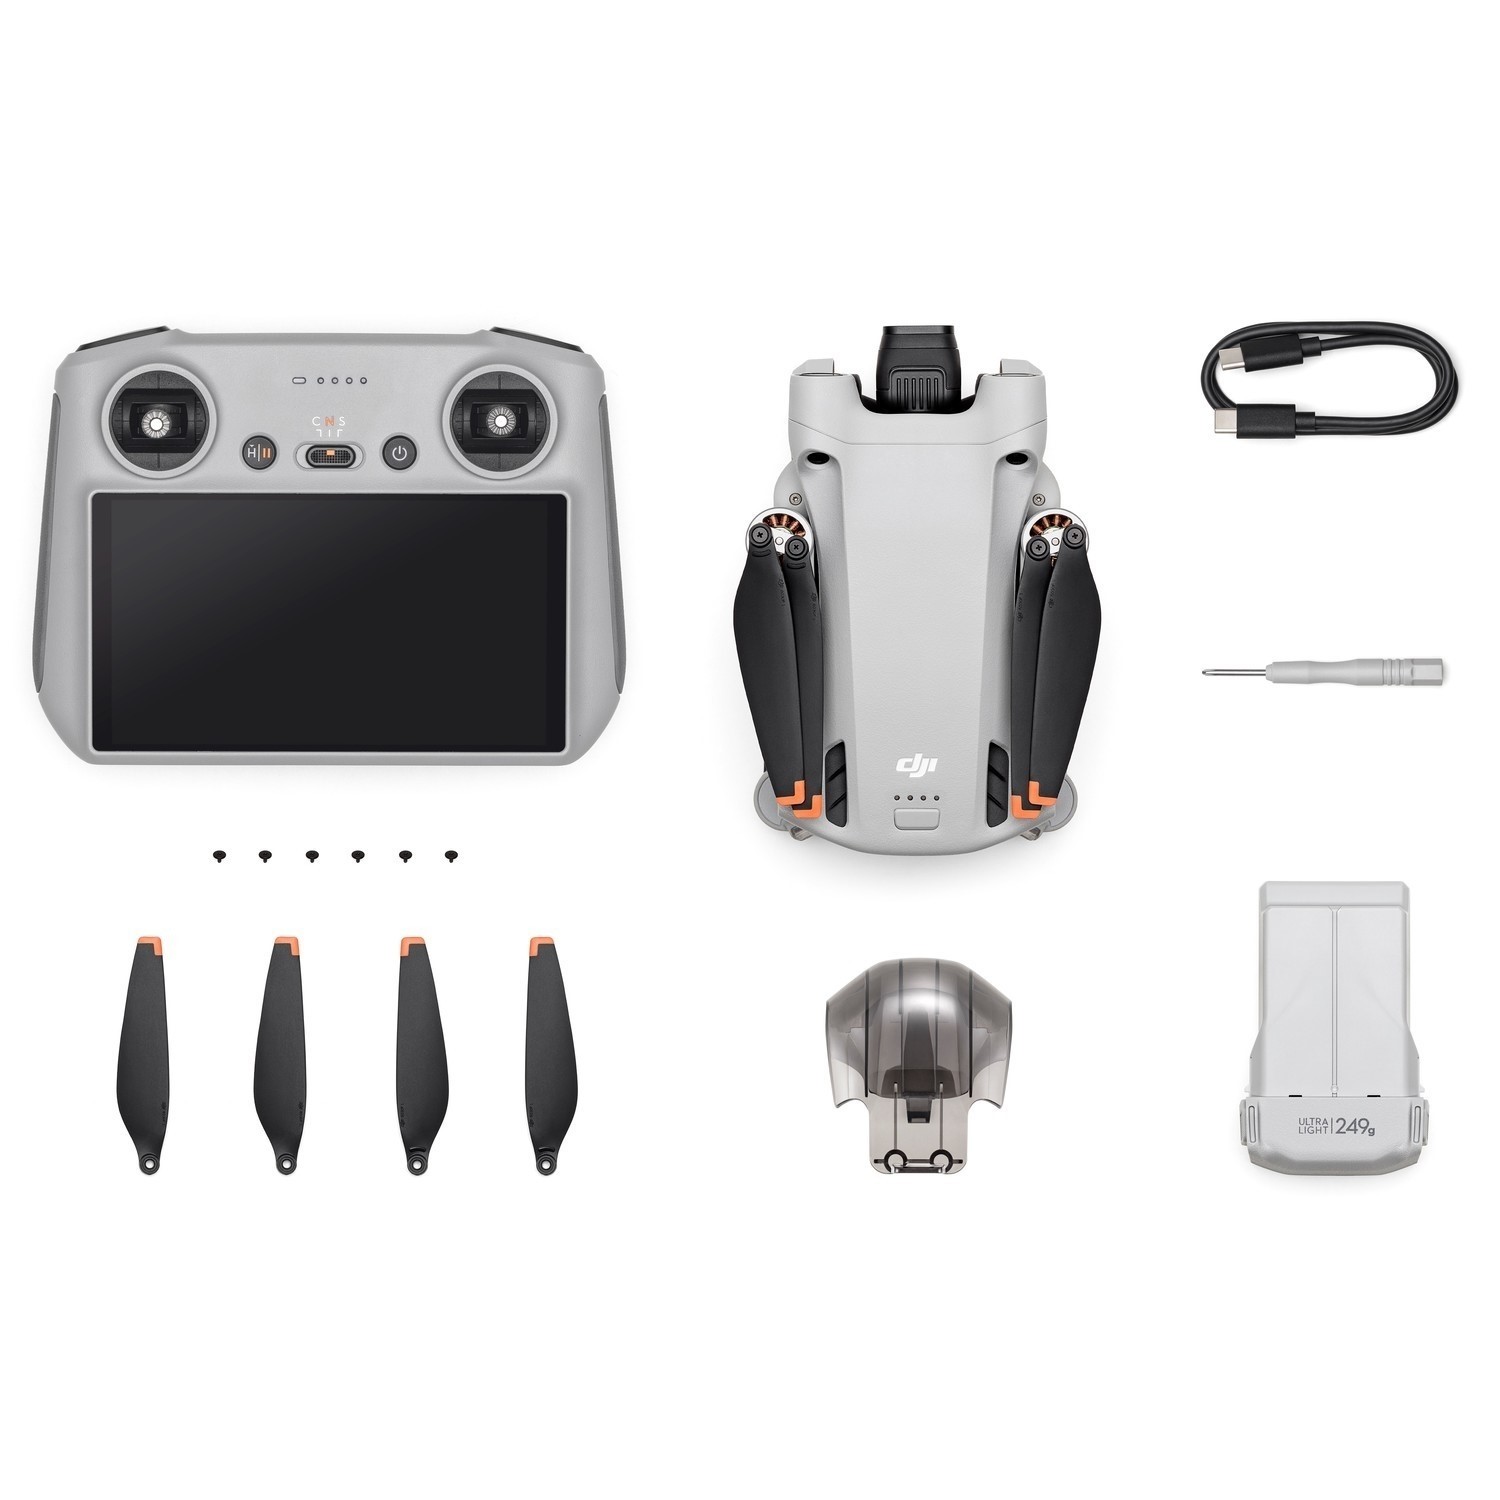 DJI FPV Drone Complete Bundle with Fly More Kit, Motion Controller, Case &  Acc.